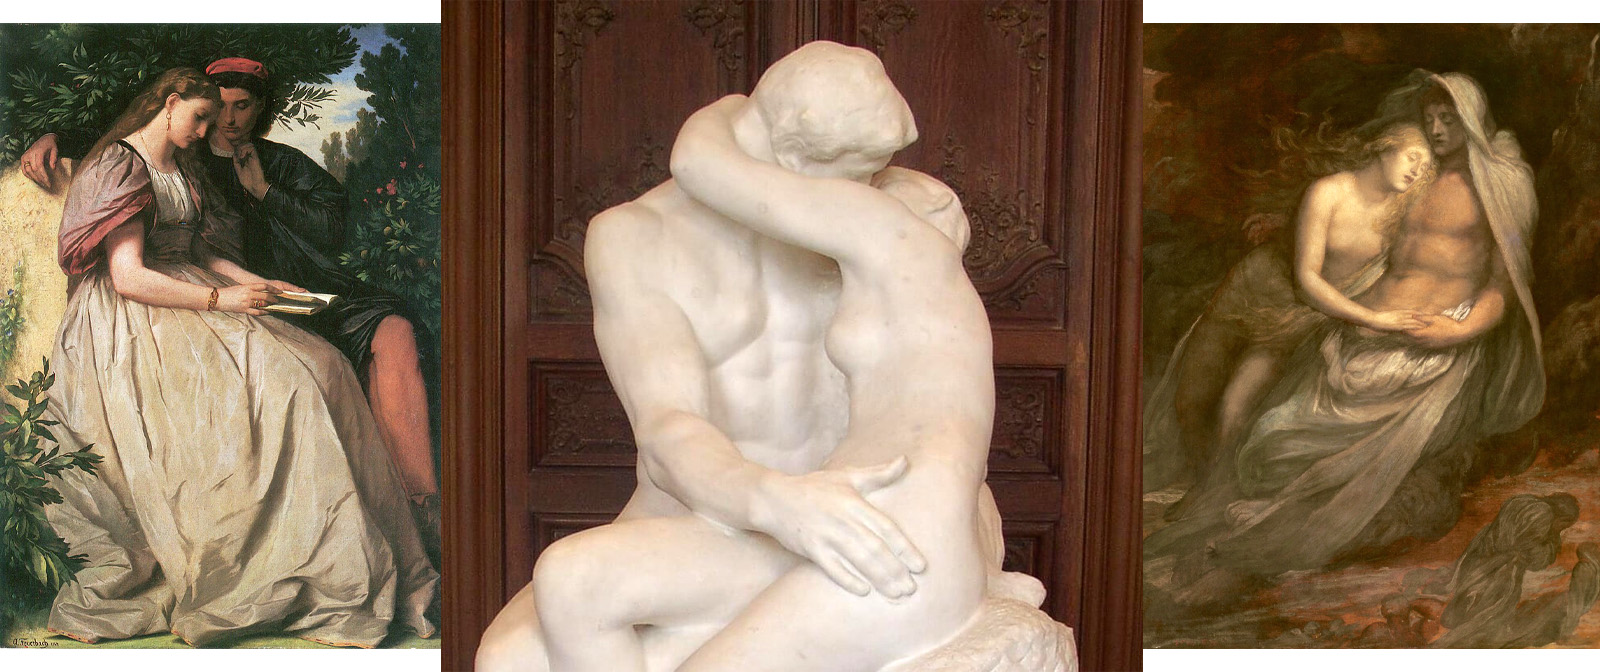 Evocative and provocative. What is so special about Rodin's sculpture "The Kiss" that makes it recognized as a world-famous masterpiece?